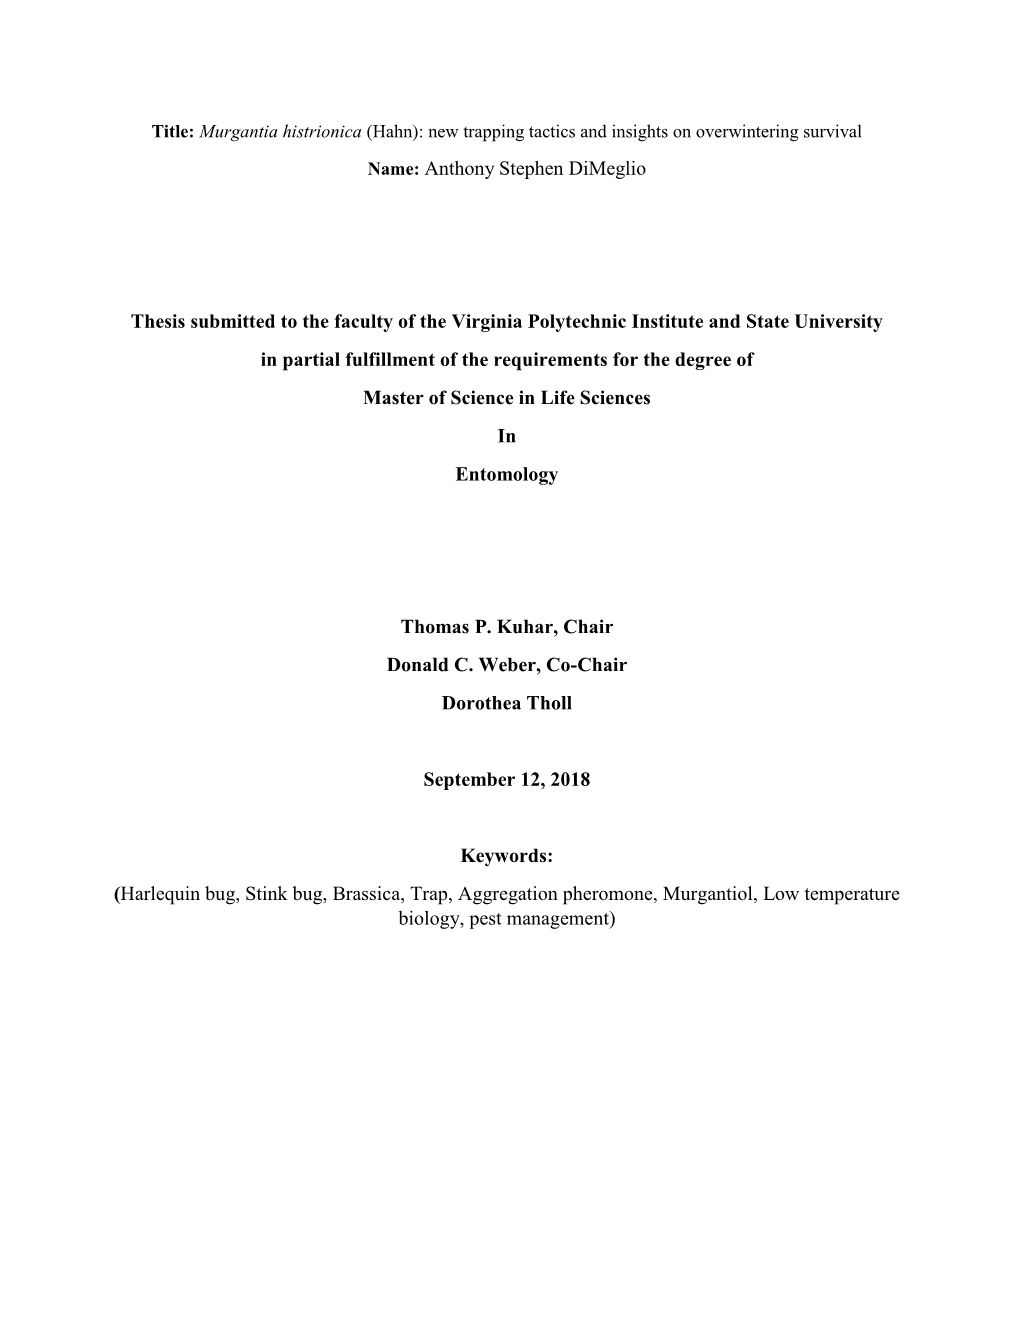 Anthony Stephen Dimeglio Thesis Submitted to The